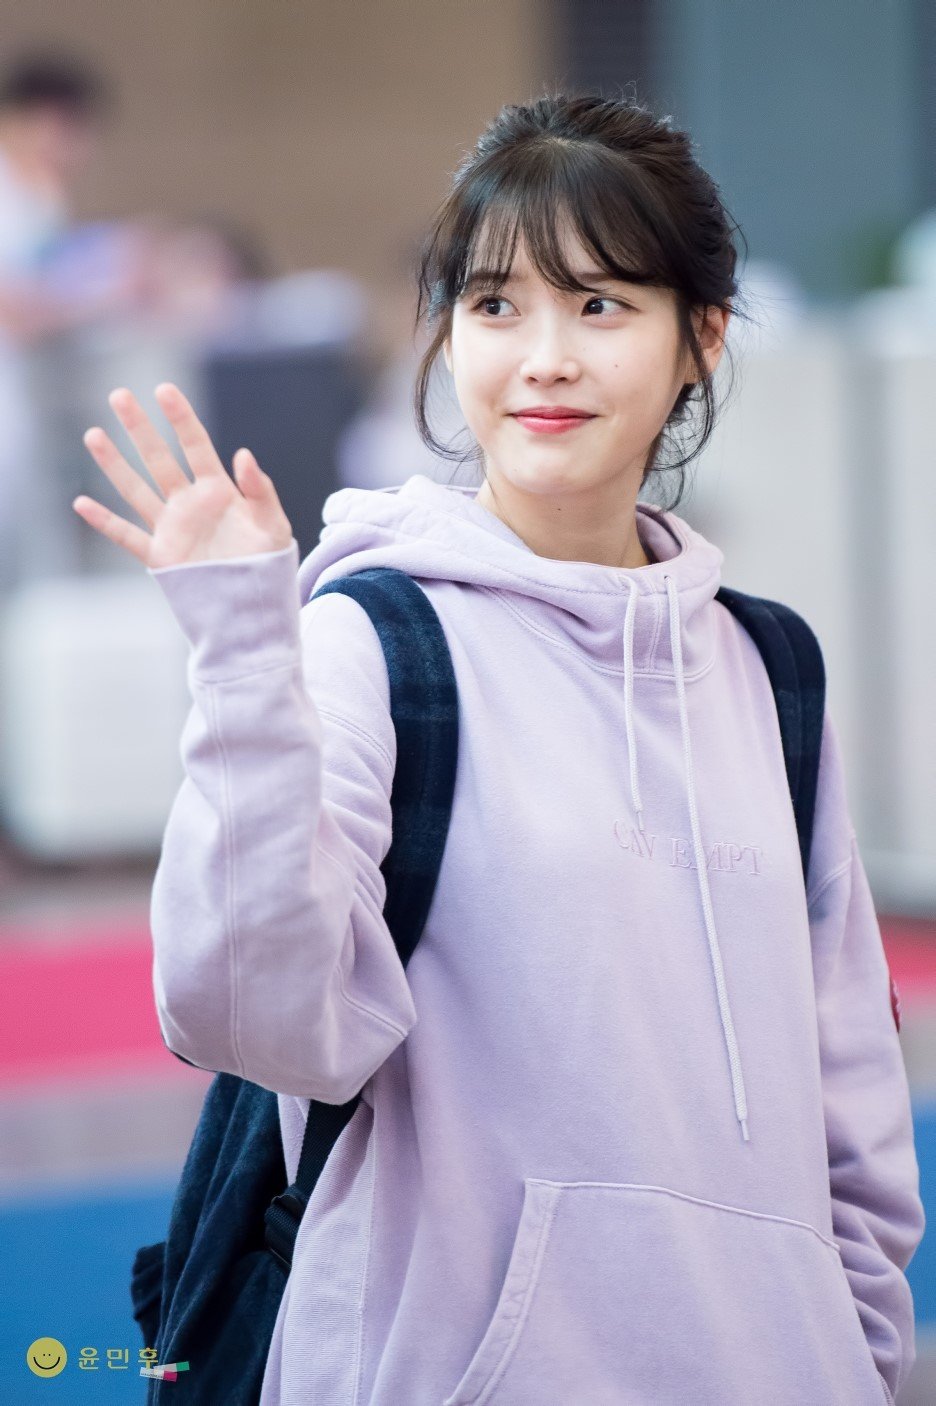 IU's personal fashion taste is different from all other idols - Koreaboo